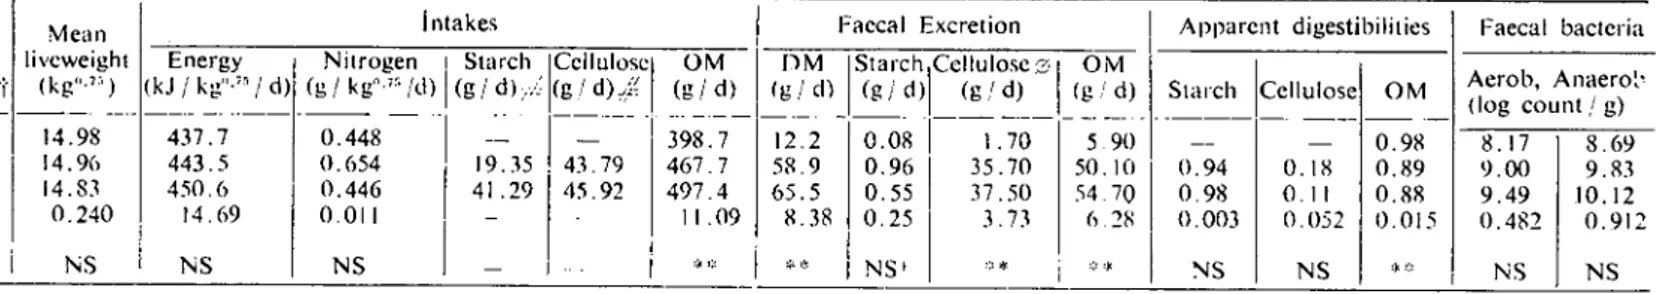 Table ı. Mean inıakcs and faec;ı1 excretion of DM, OM, starch and cellulose. apparent digesıibility coefficient and faecal hacterial counts in sheepgiven infusions oı starclı and ccllulose into the terminal ileum (each value is the ıncan of 4 obscrvaıions)